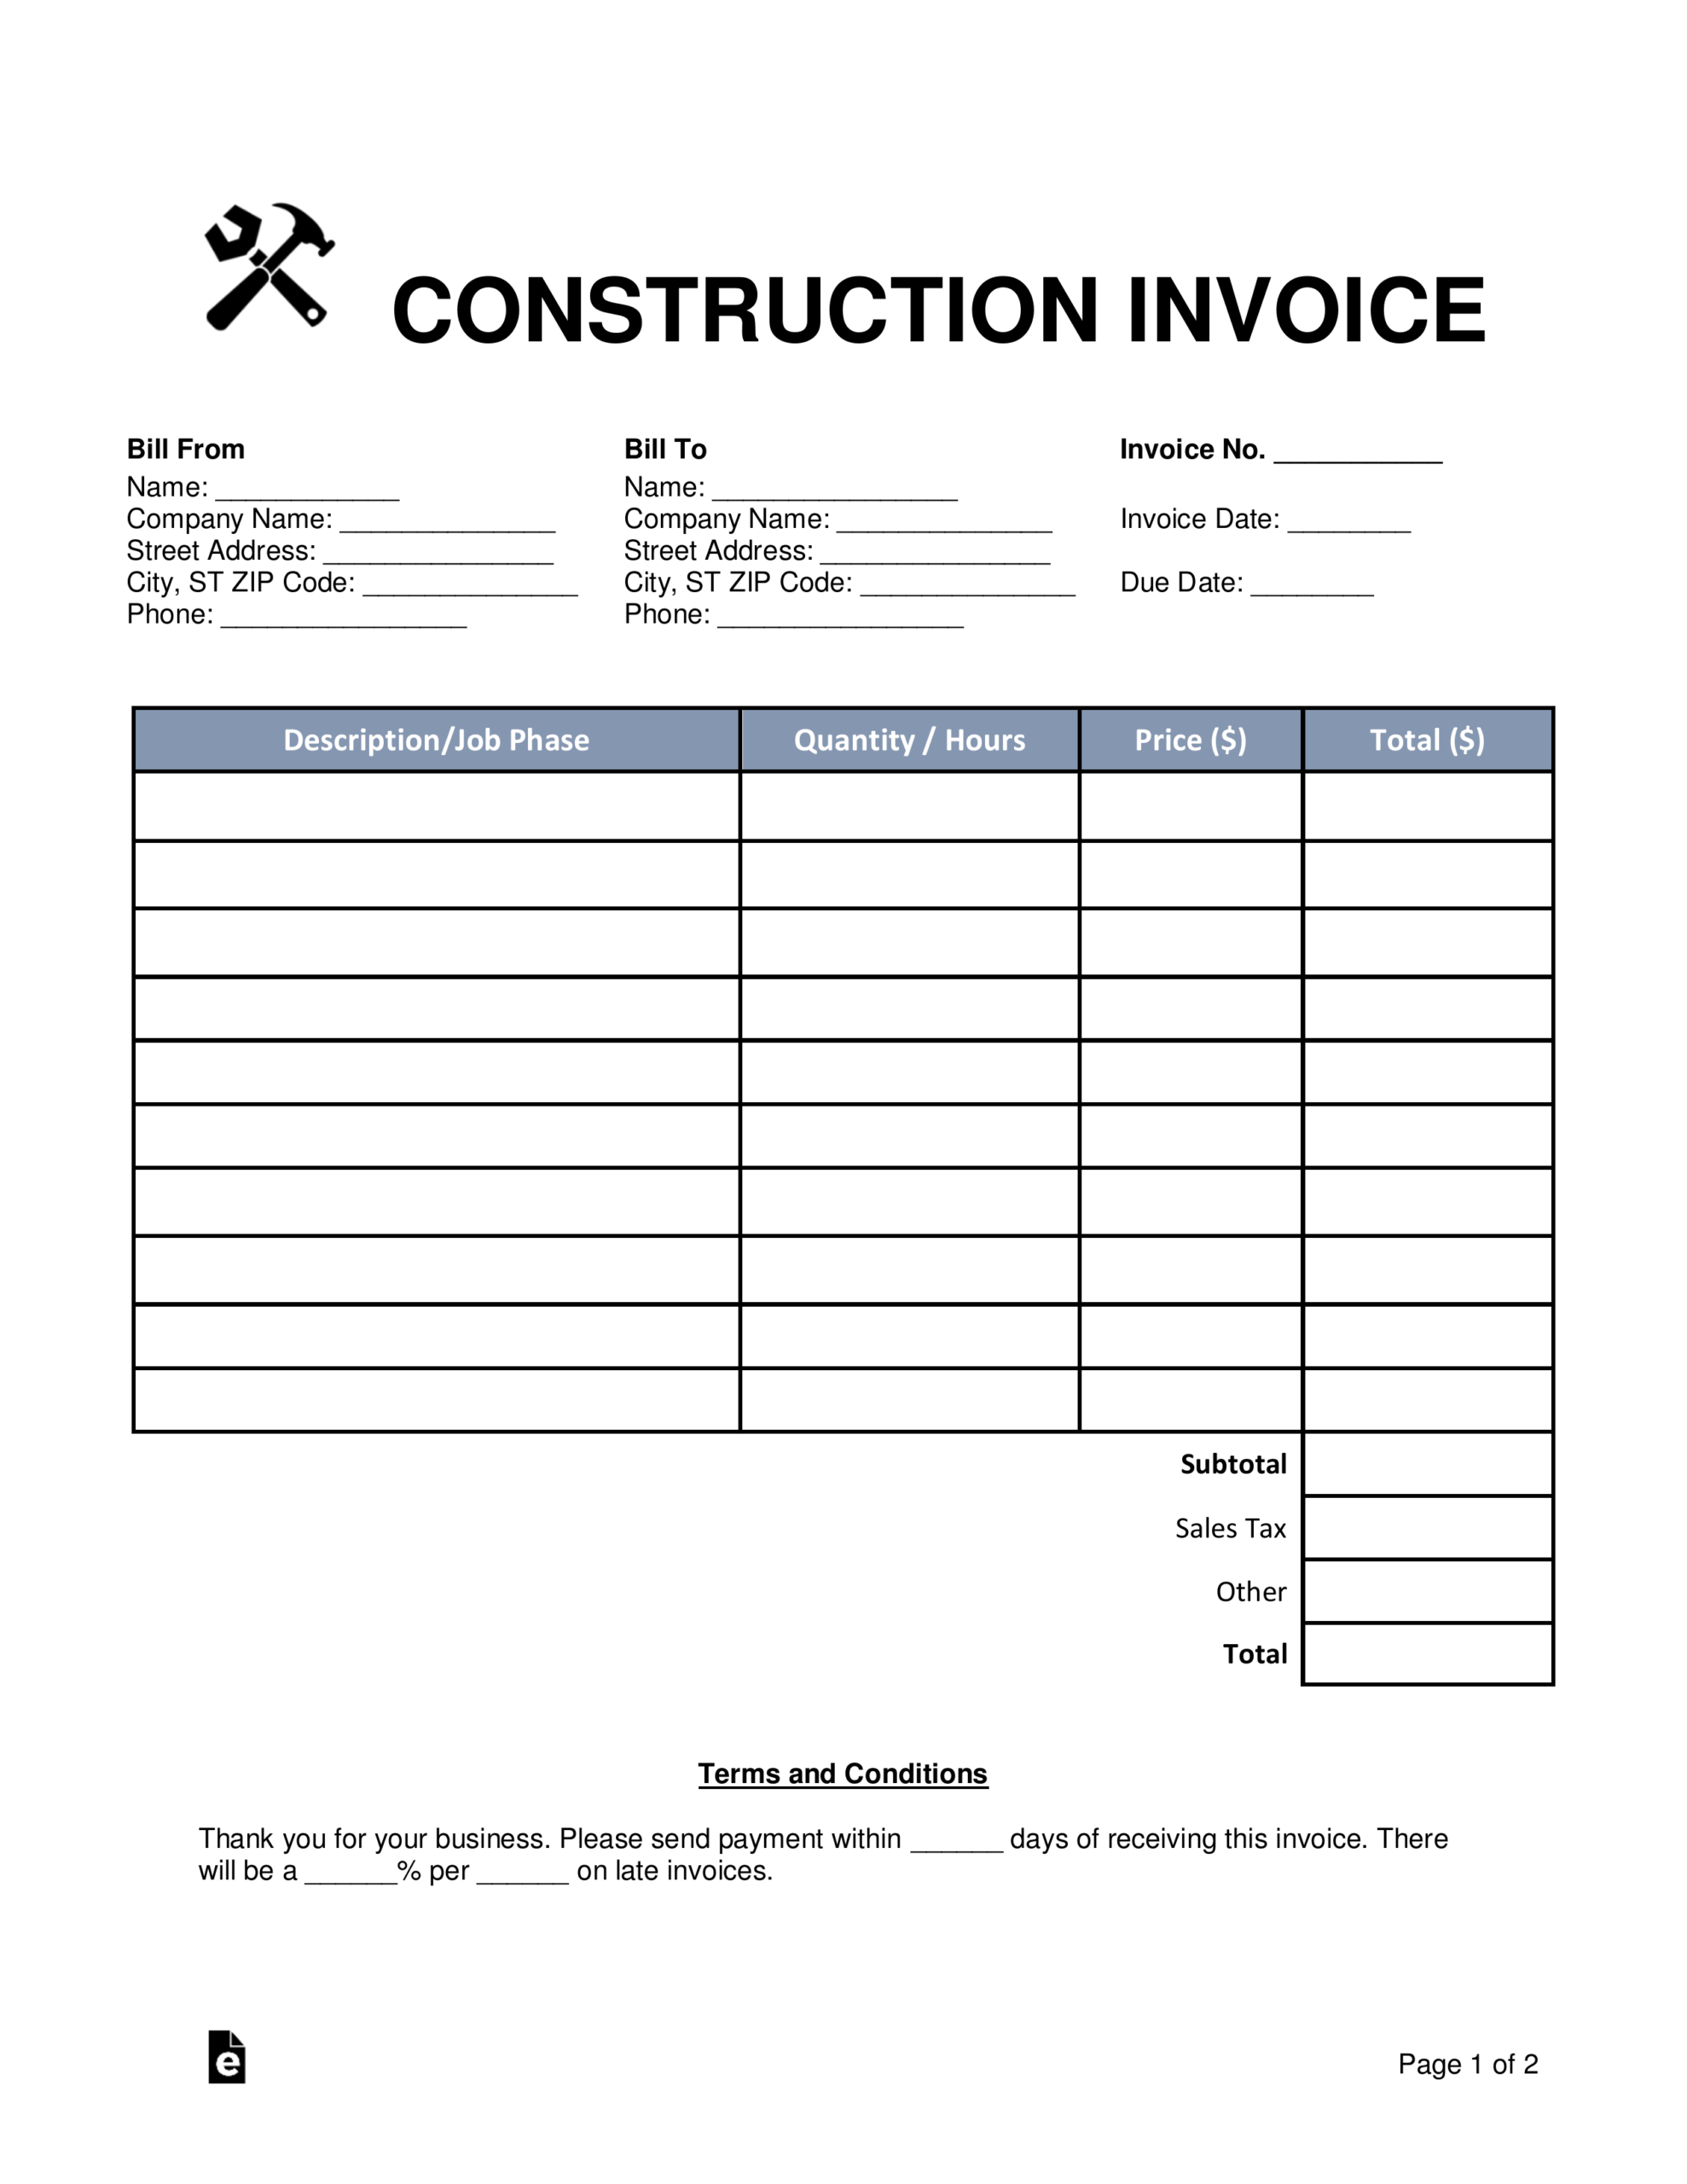 Construction Invoice Template Pdf - Horizonconsulting.co With Contractors Invoices Free Templates